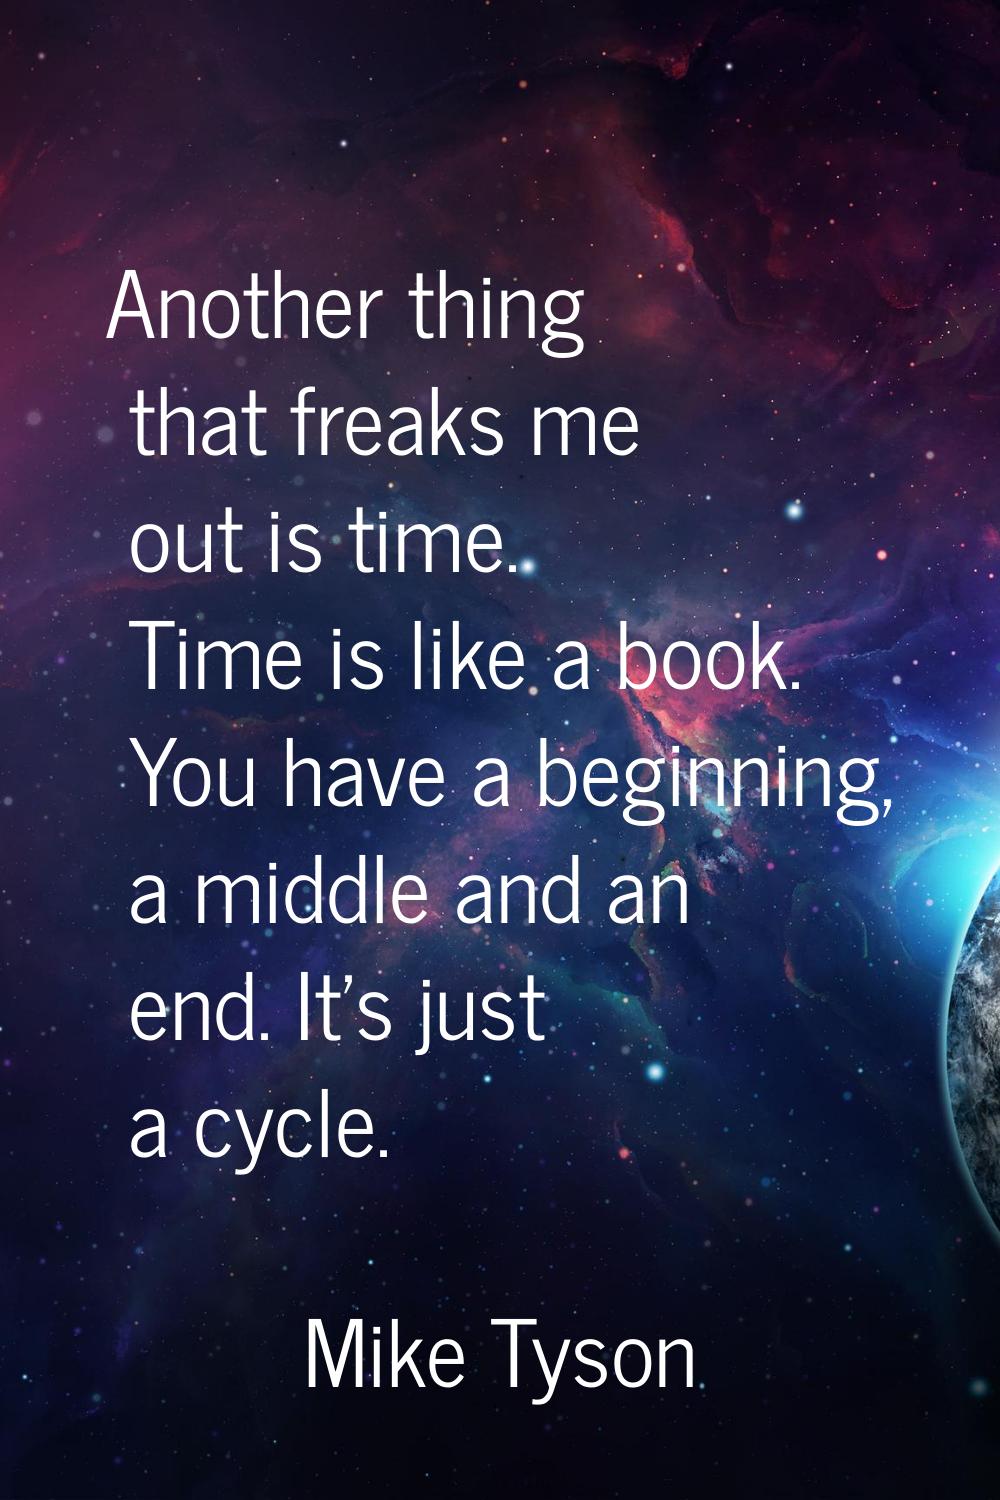 Another thing that freaks me out is time. Time is like a book. You have a beginning, a middle and a